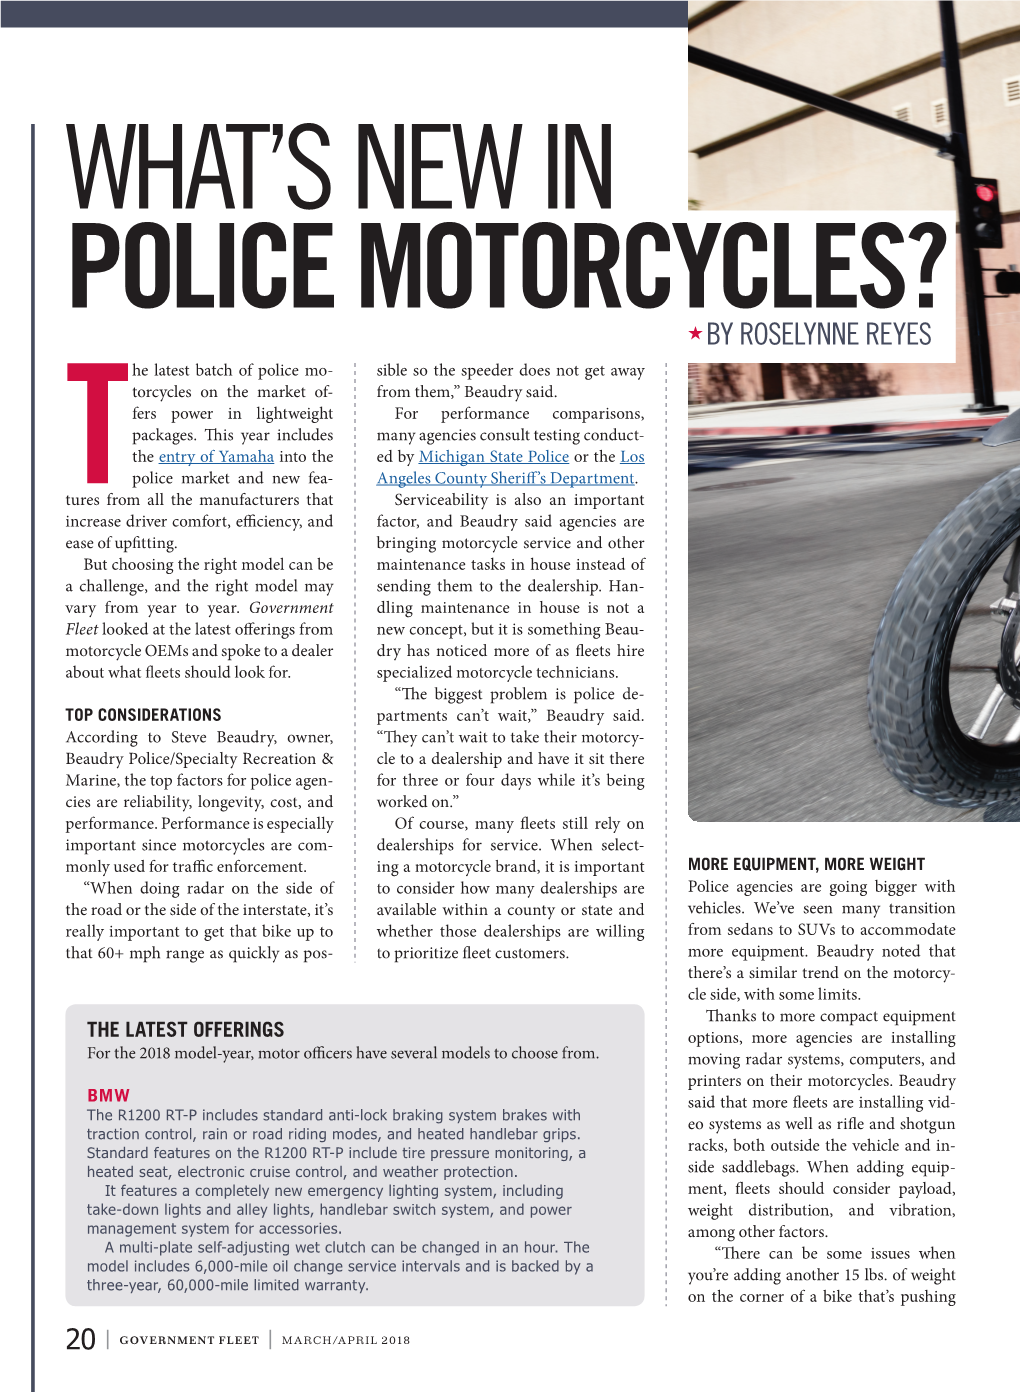 What's New in Police Motorcycles for 2018